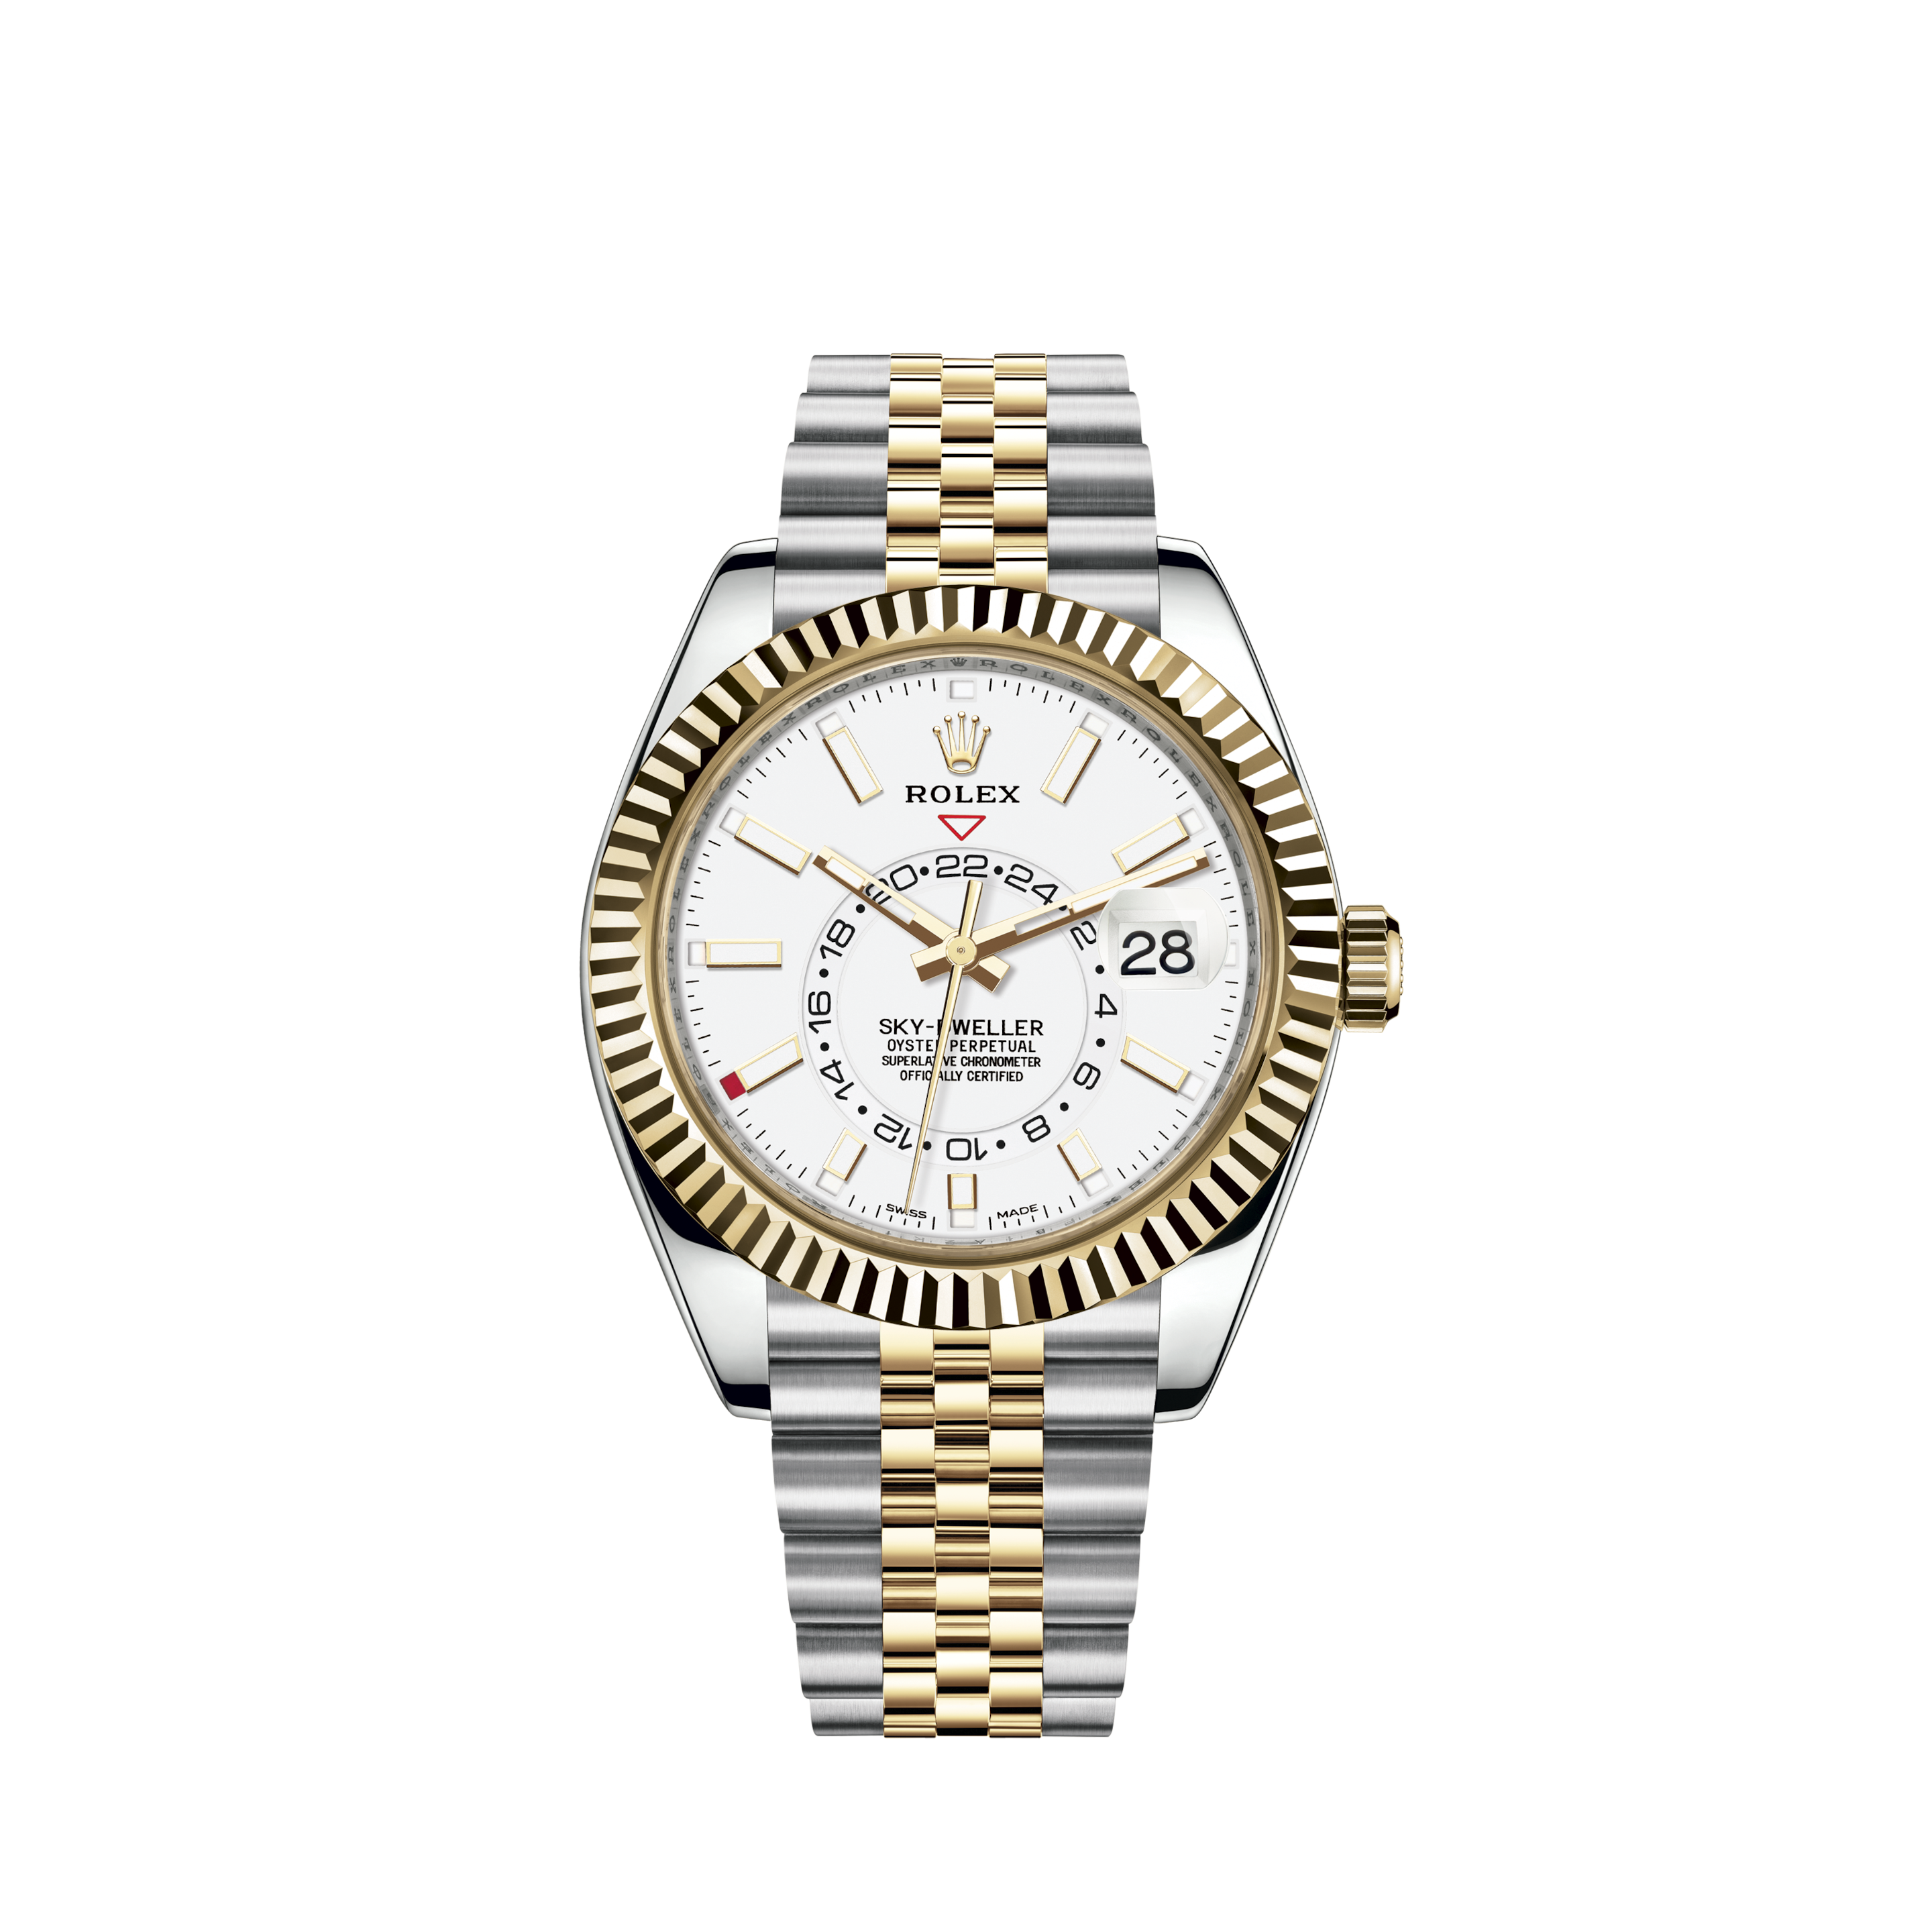 Rolex Datejust 36mm Oyster Black Dial Smooth Bezel 2021Rolex Datejust 36mm Oyster Diamond Bezel Pink Dial 116200 MINT